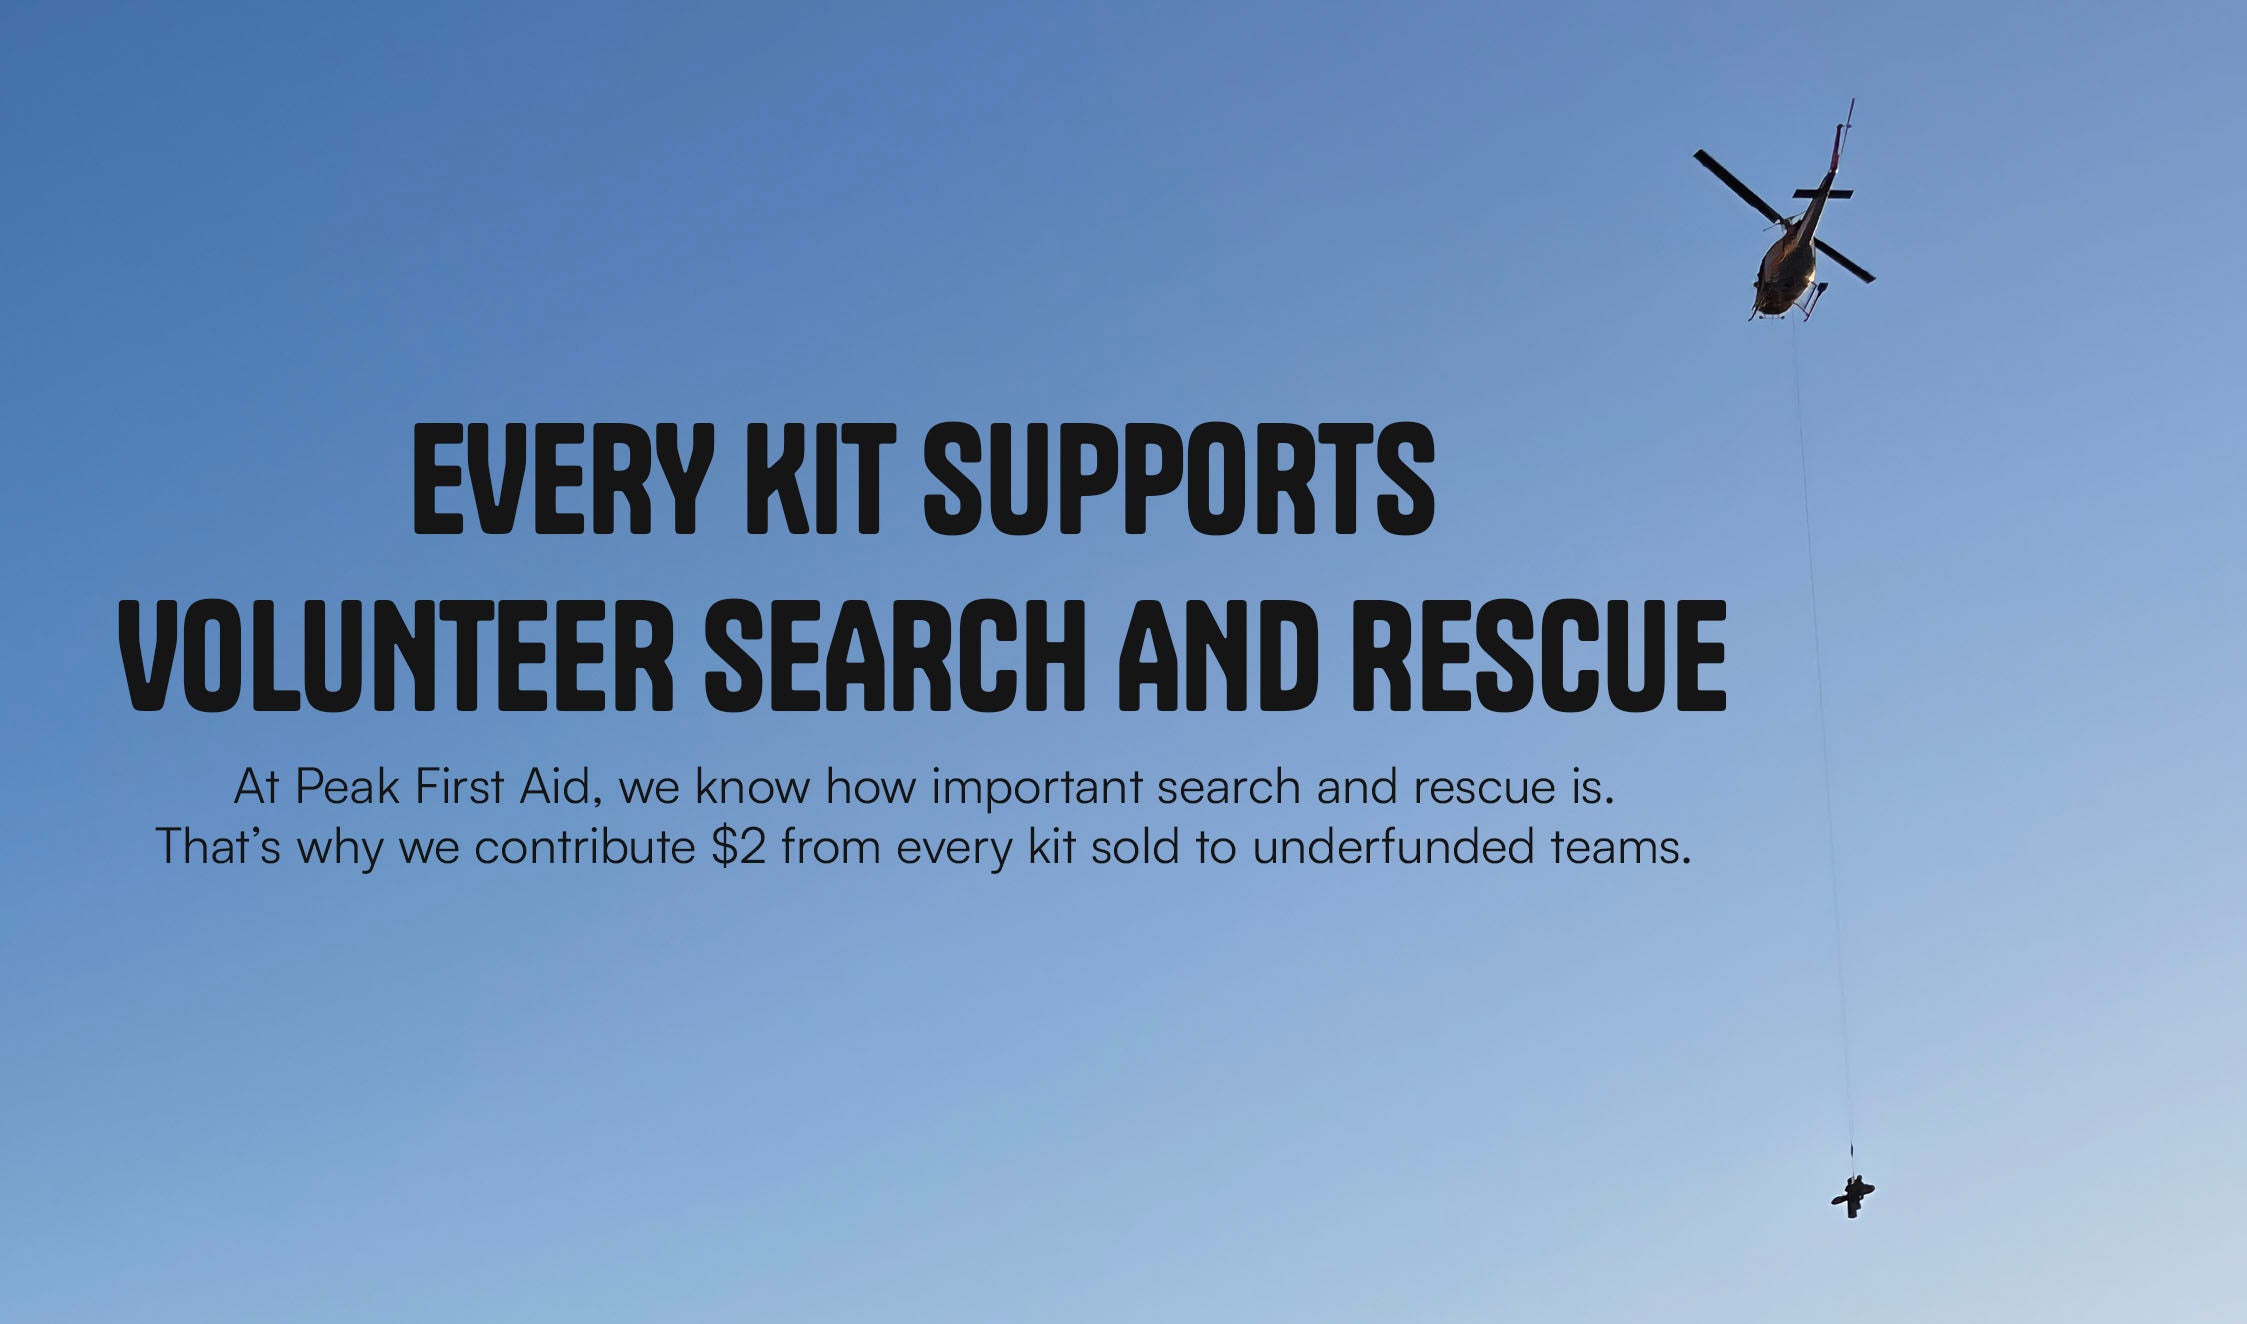 A helicopter flying into blue sky with the text "Every Kit Supports Volunteer Search and Rescue"